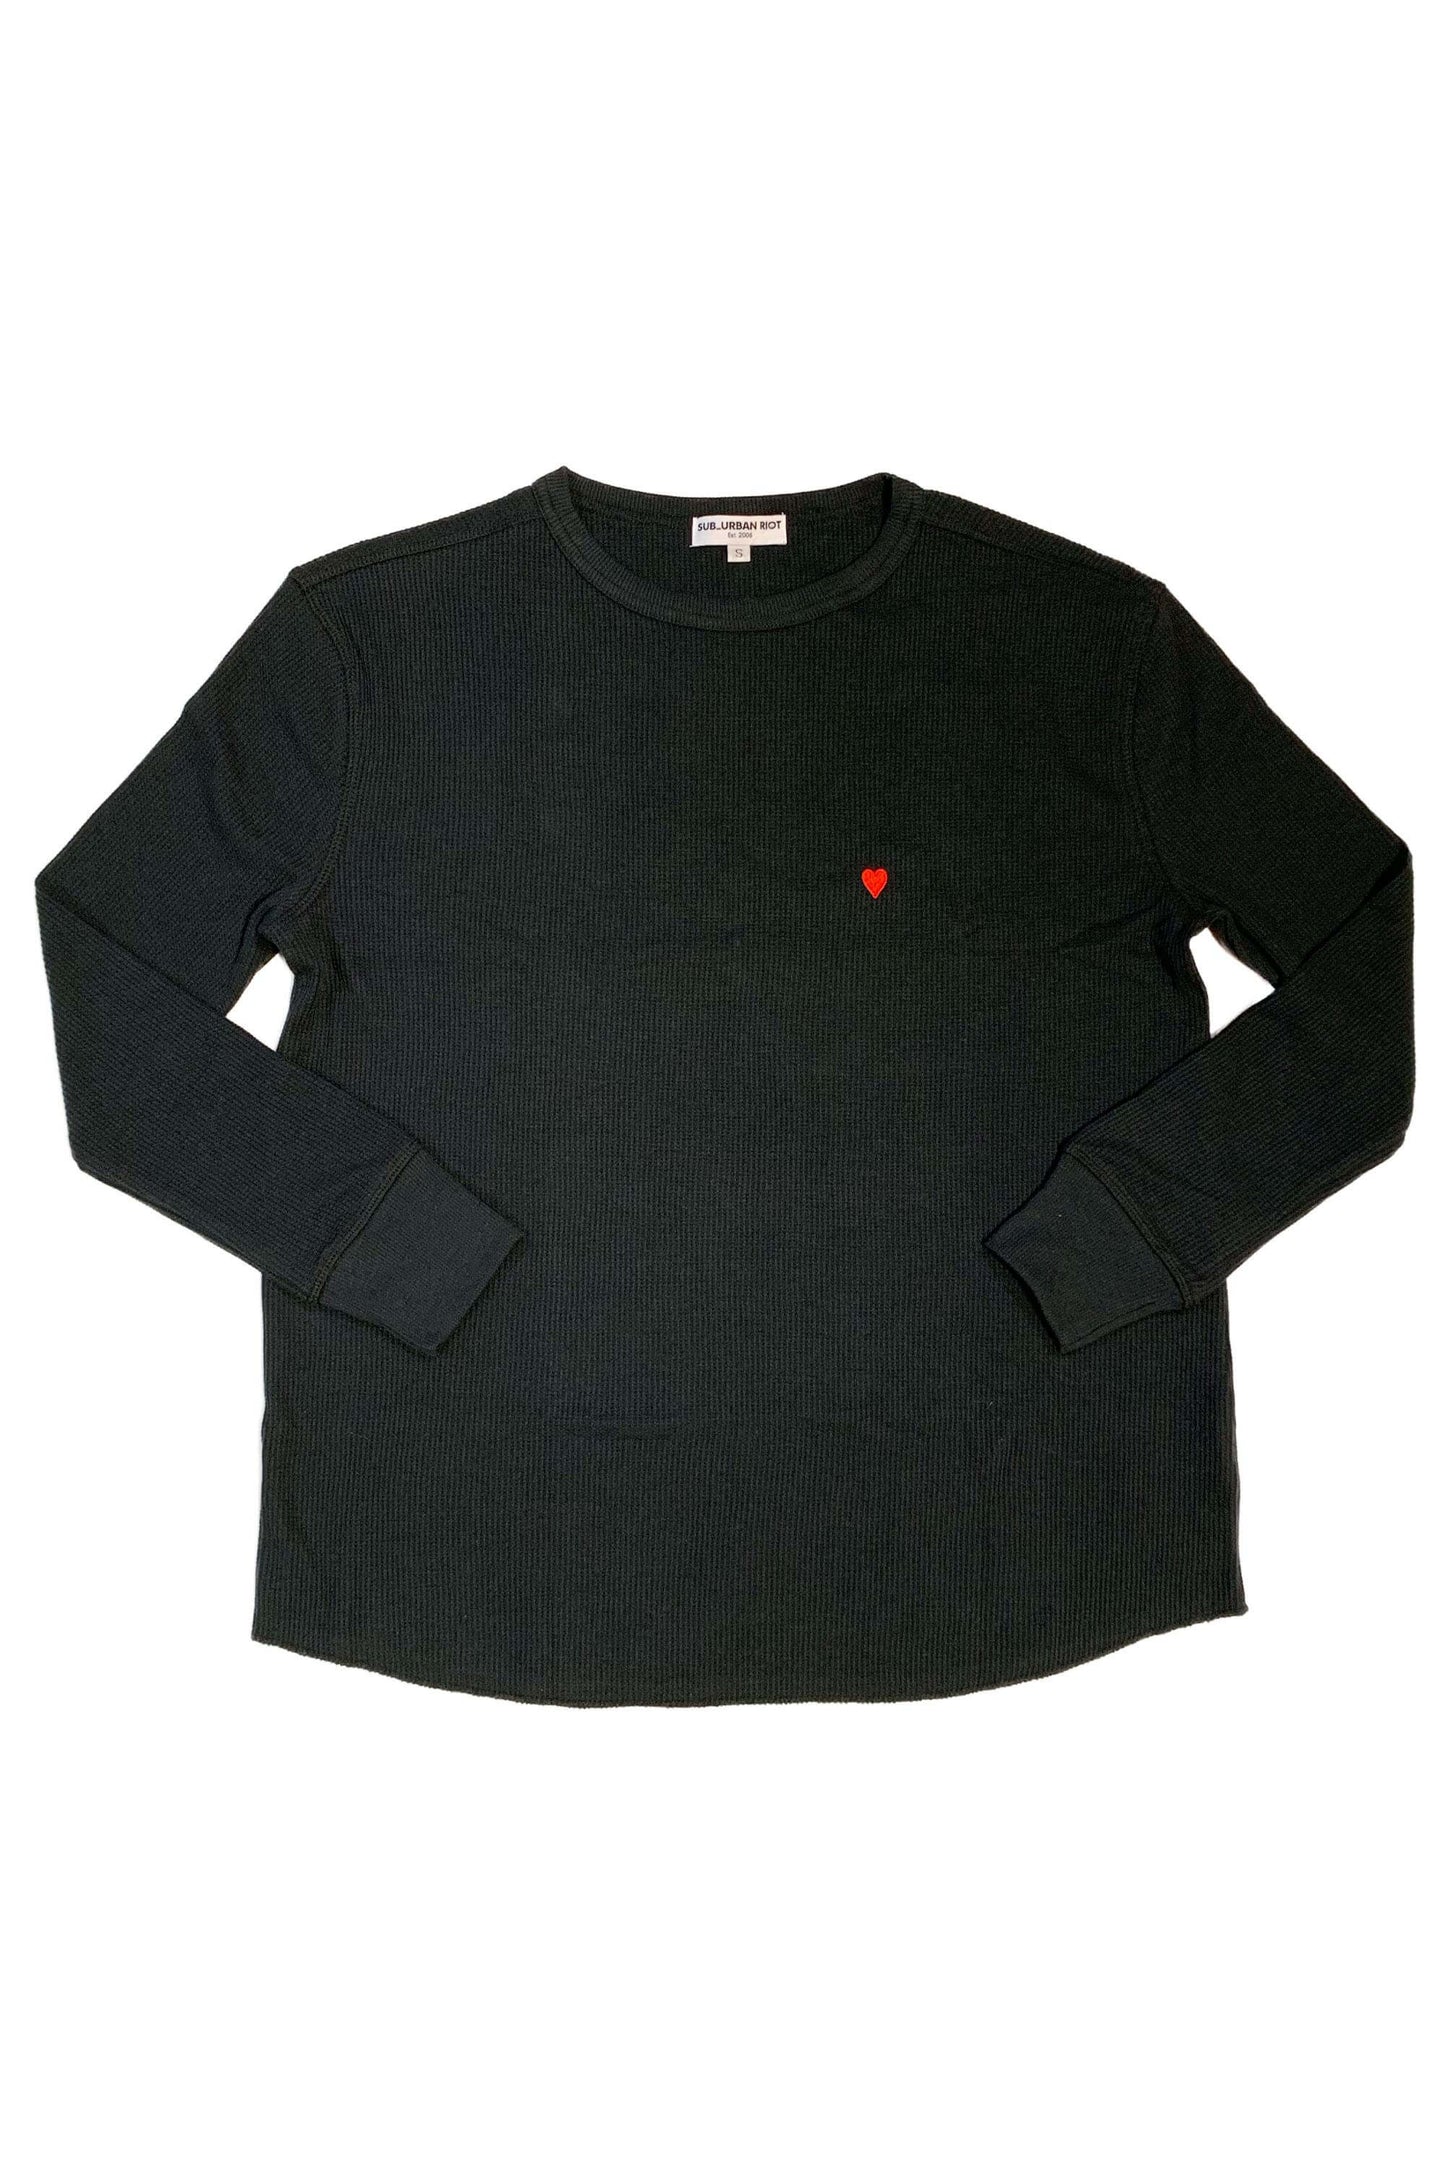 HEART EMB YOUTH THERMAL || SUBURBAN RIOT